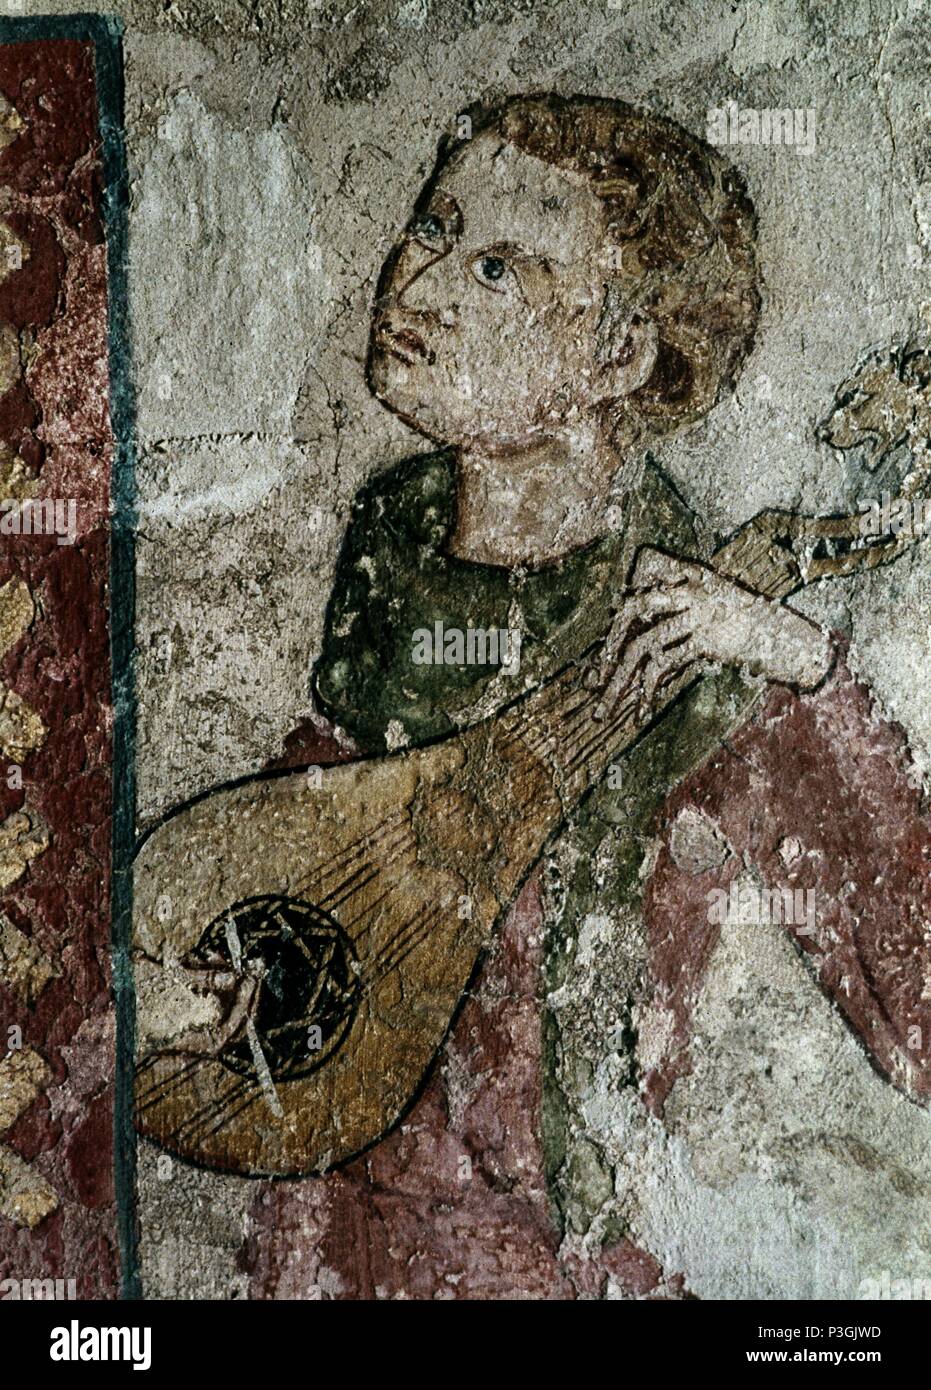 Spanish school. Detail of Passion: Medieval lute player. Mural painting from the Pamplona Cathedral refectory. Pamplona, Navarra museum. Author: Juan Oliver (14th cent.). Location: MUSEO DE NAVARRA, PAMPLONA, NAVARRA, SPAIN. Stock Photo